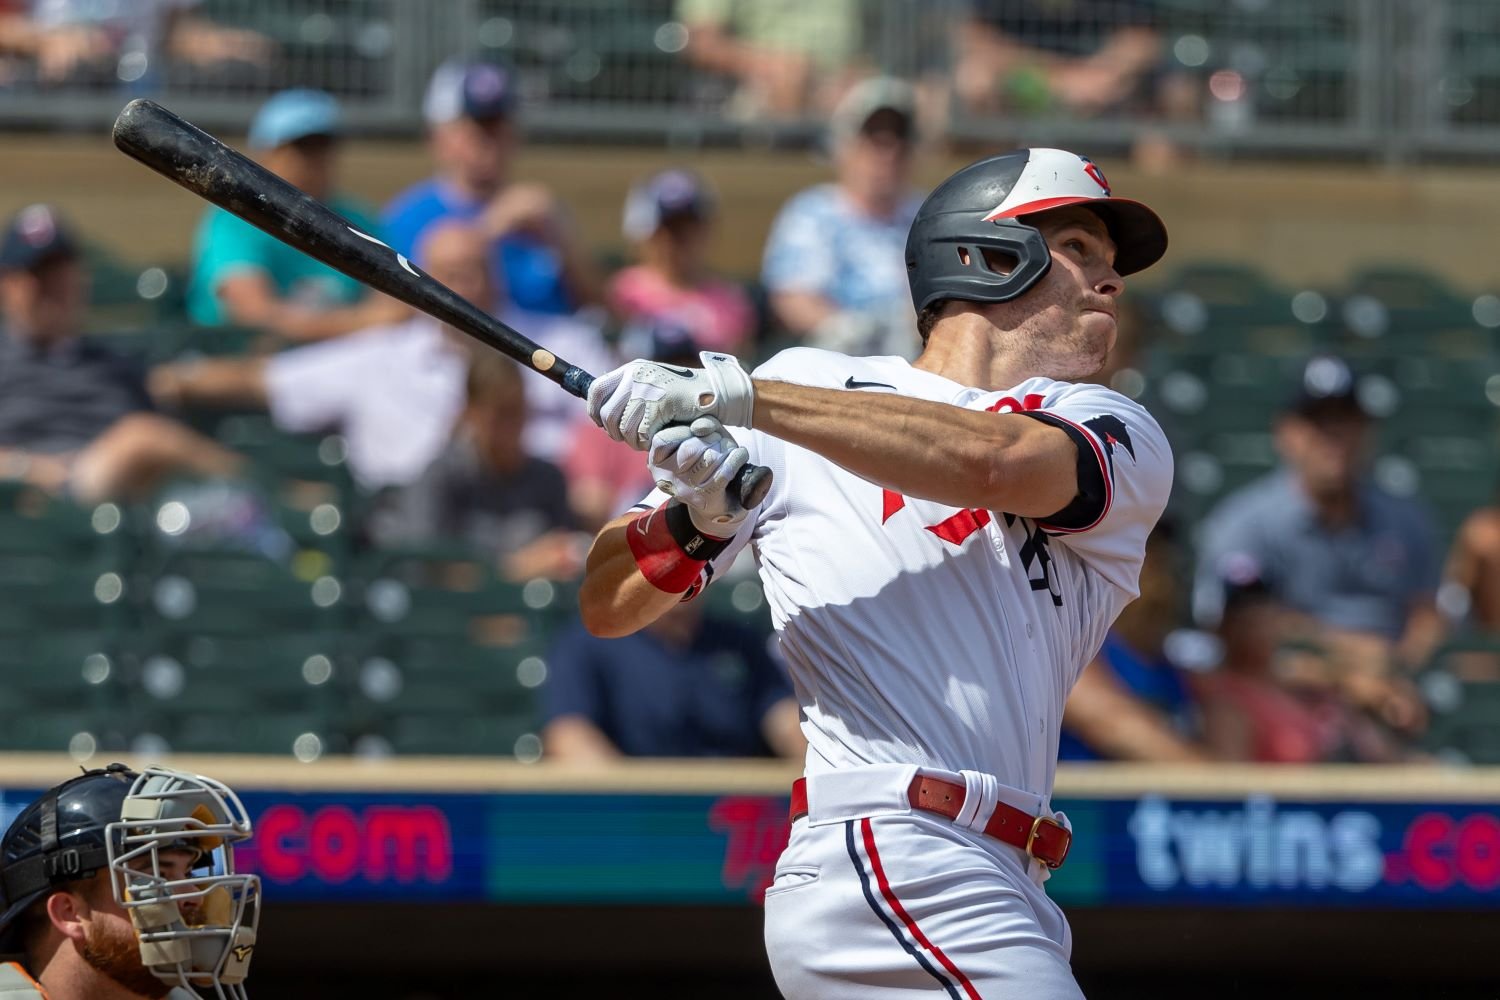 Max Kepler - MLB Right field - News, Stats, Bio and more - The Athletic